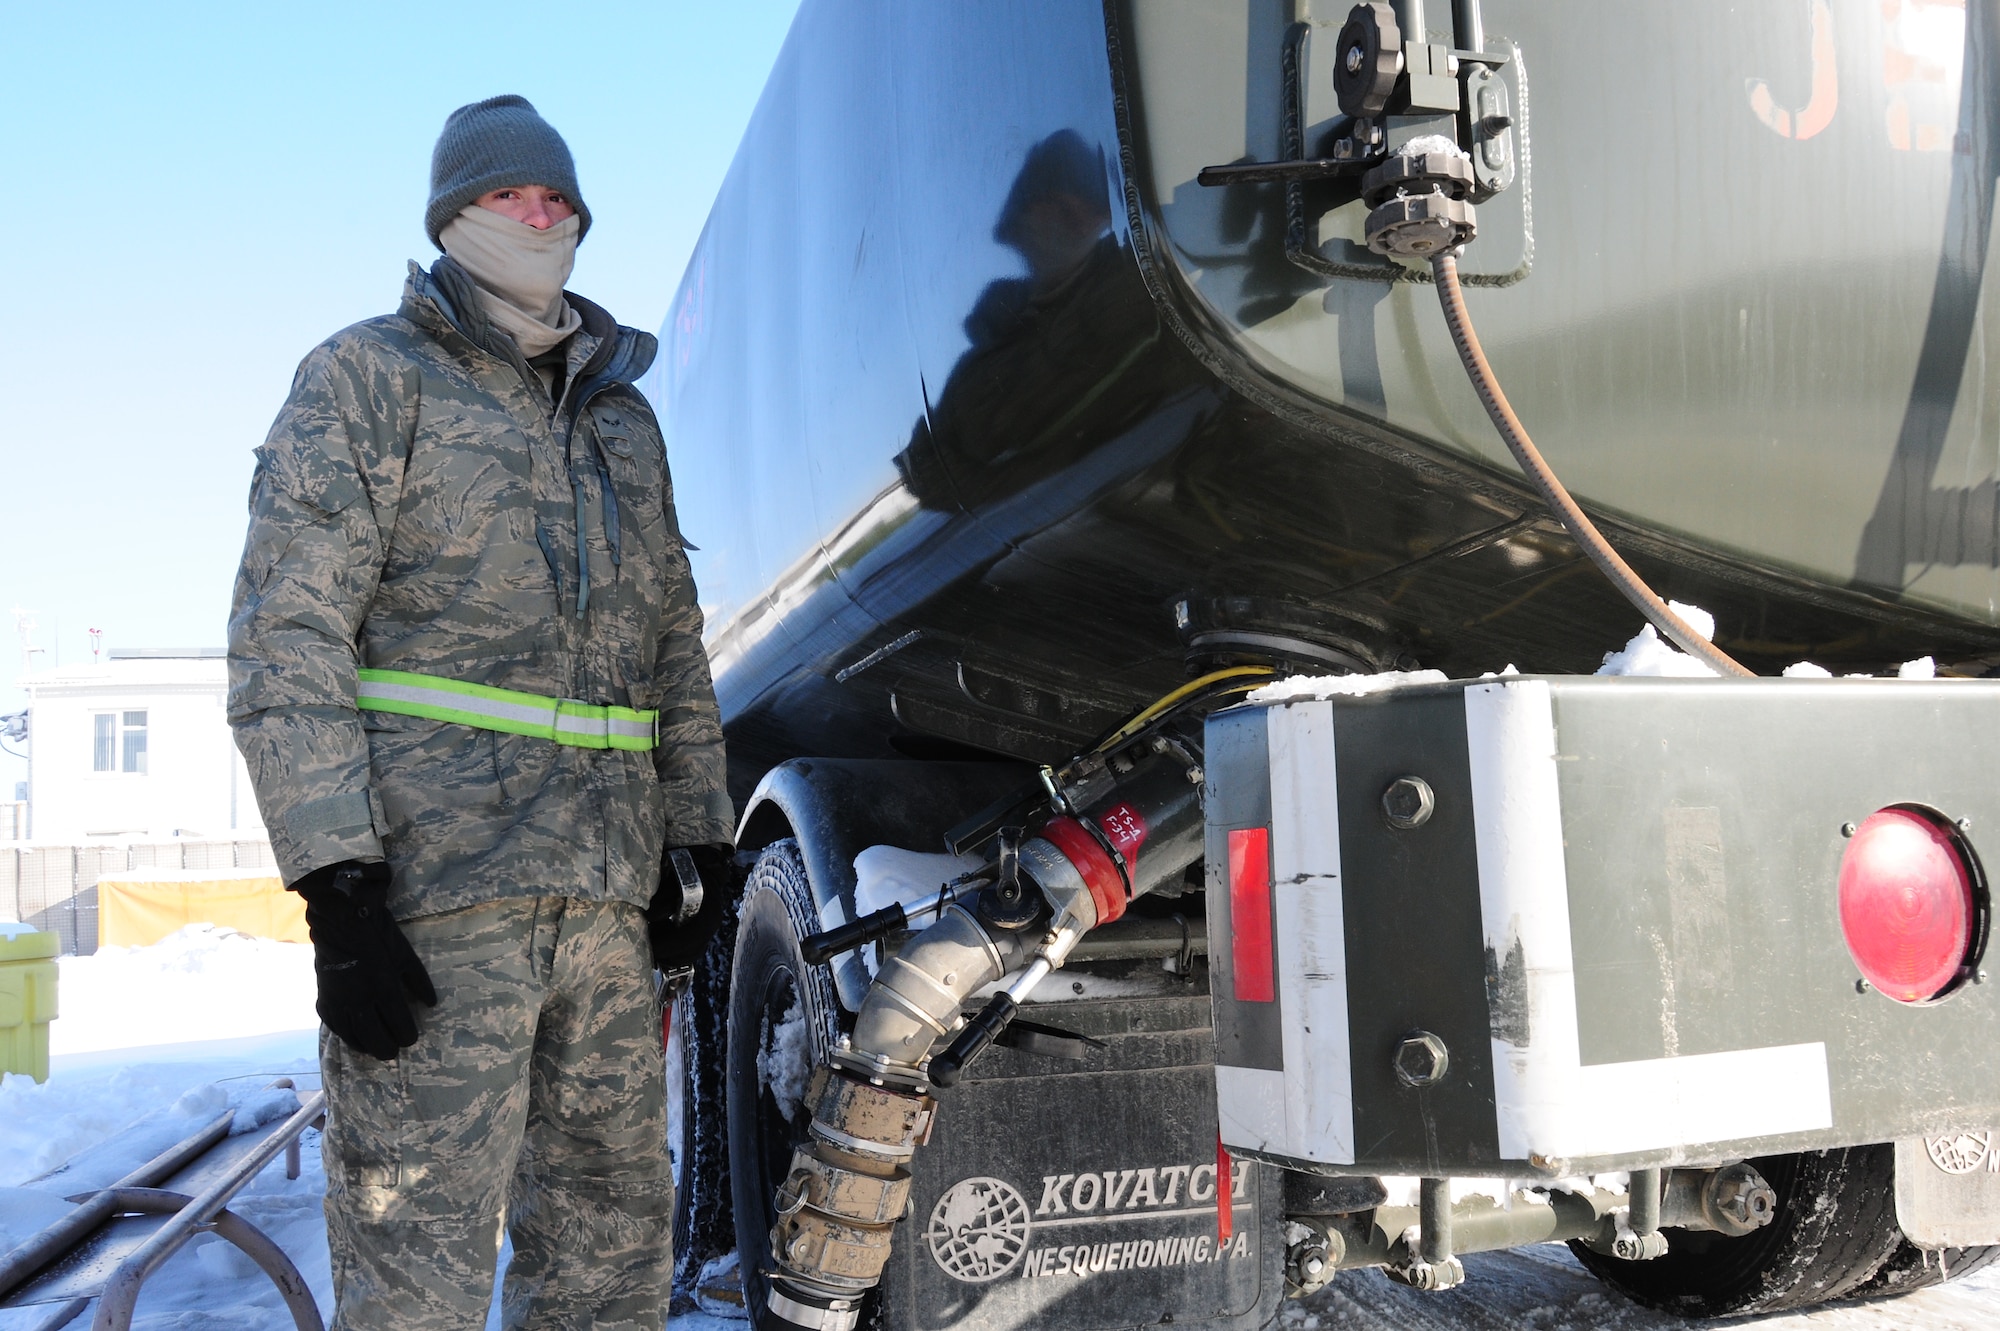 Airman 1st Class Justin Bell, pumps jet fuel into a tank to be transported to the flightline at the Transit Center at Manas, Kyrgyzstan, Jan. 19, 2010. Airman Bell is a 376th Expeditionary Logistics Readiness Squadron petroleum, oil and lubricants specialist. The POL flight here was the first in the AOR to implement a new pre-filter system for fuel which will save time and money and deliver better, cleaner fuel to the aircraft the KC-135 refuels. (U.S. Air Force photo/Senior Airman Nichelle Anderson/Released)